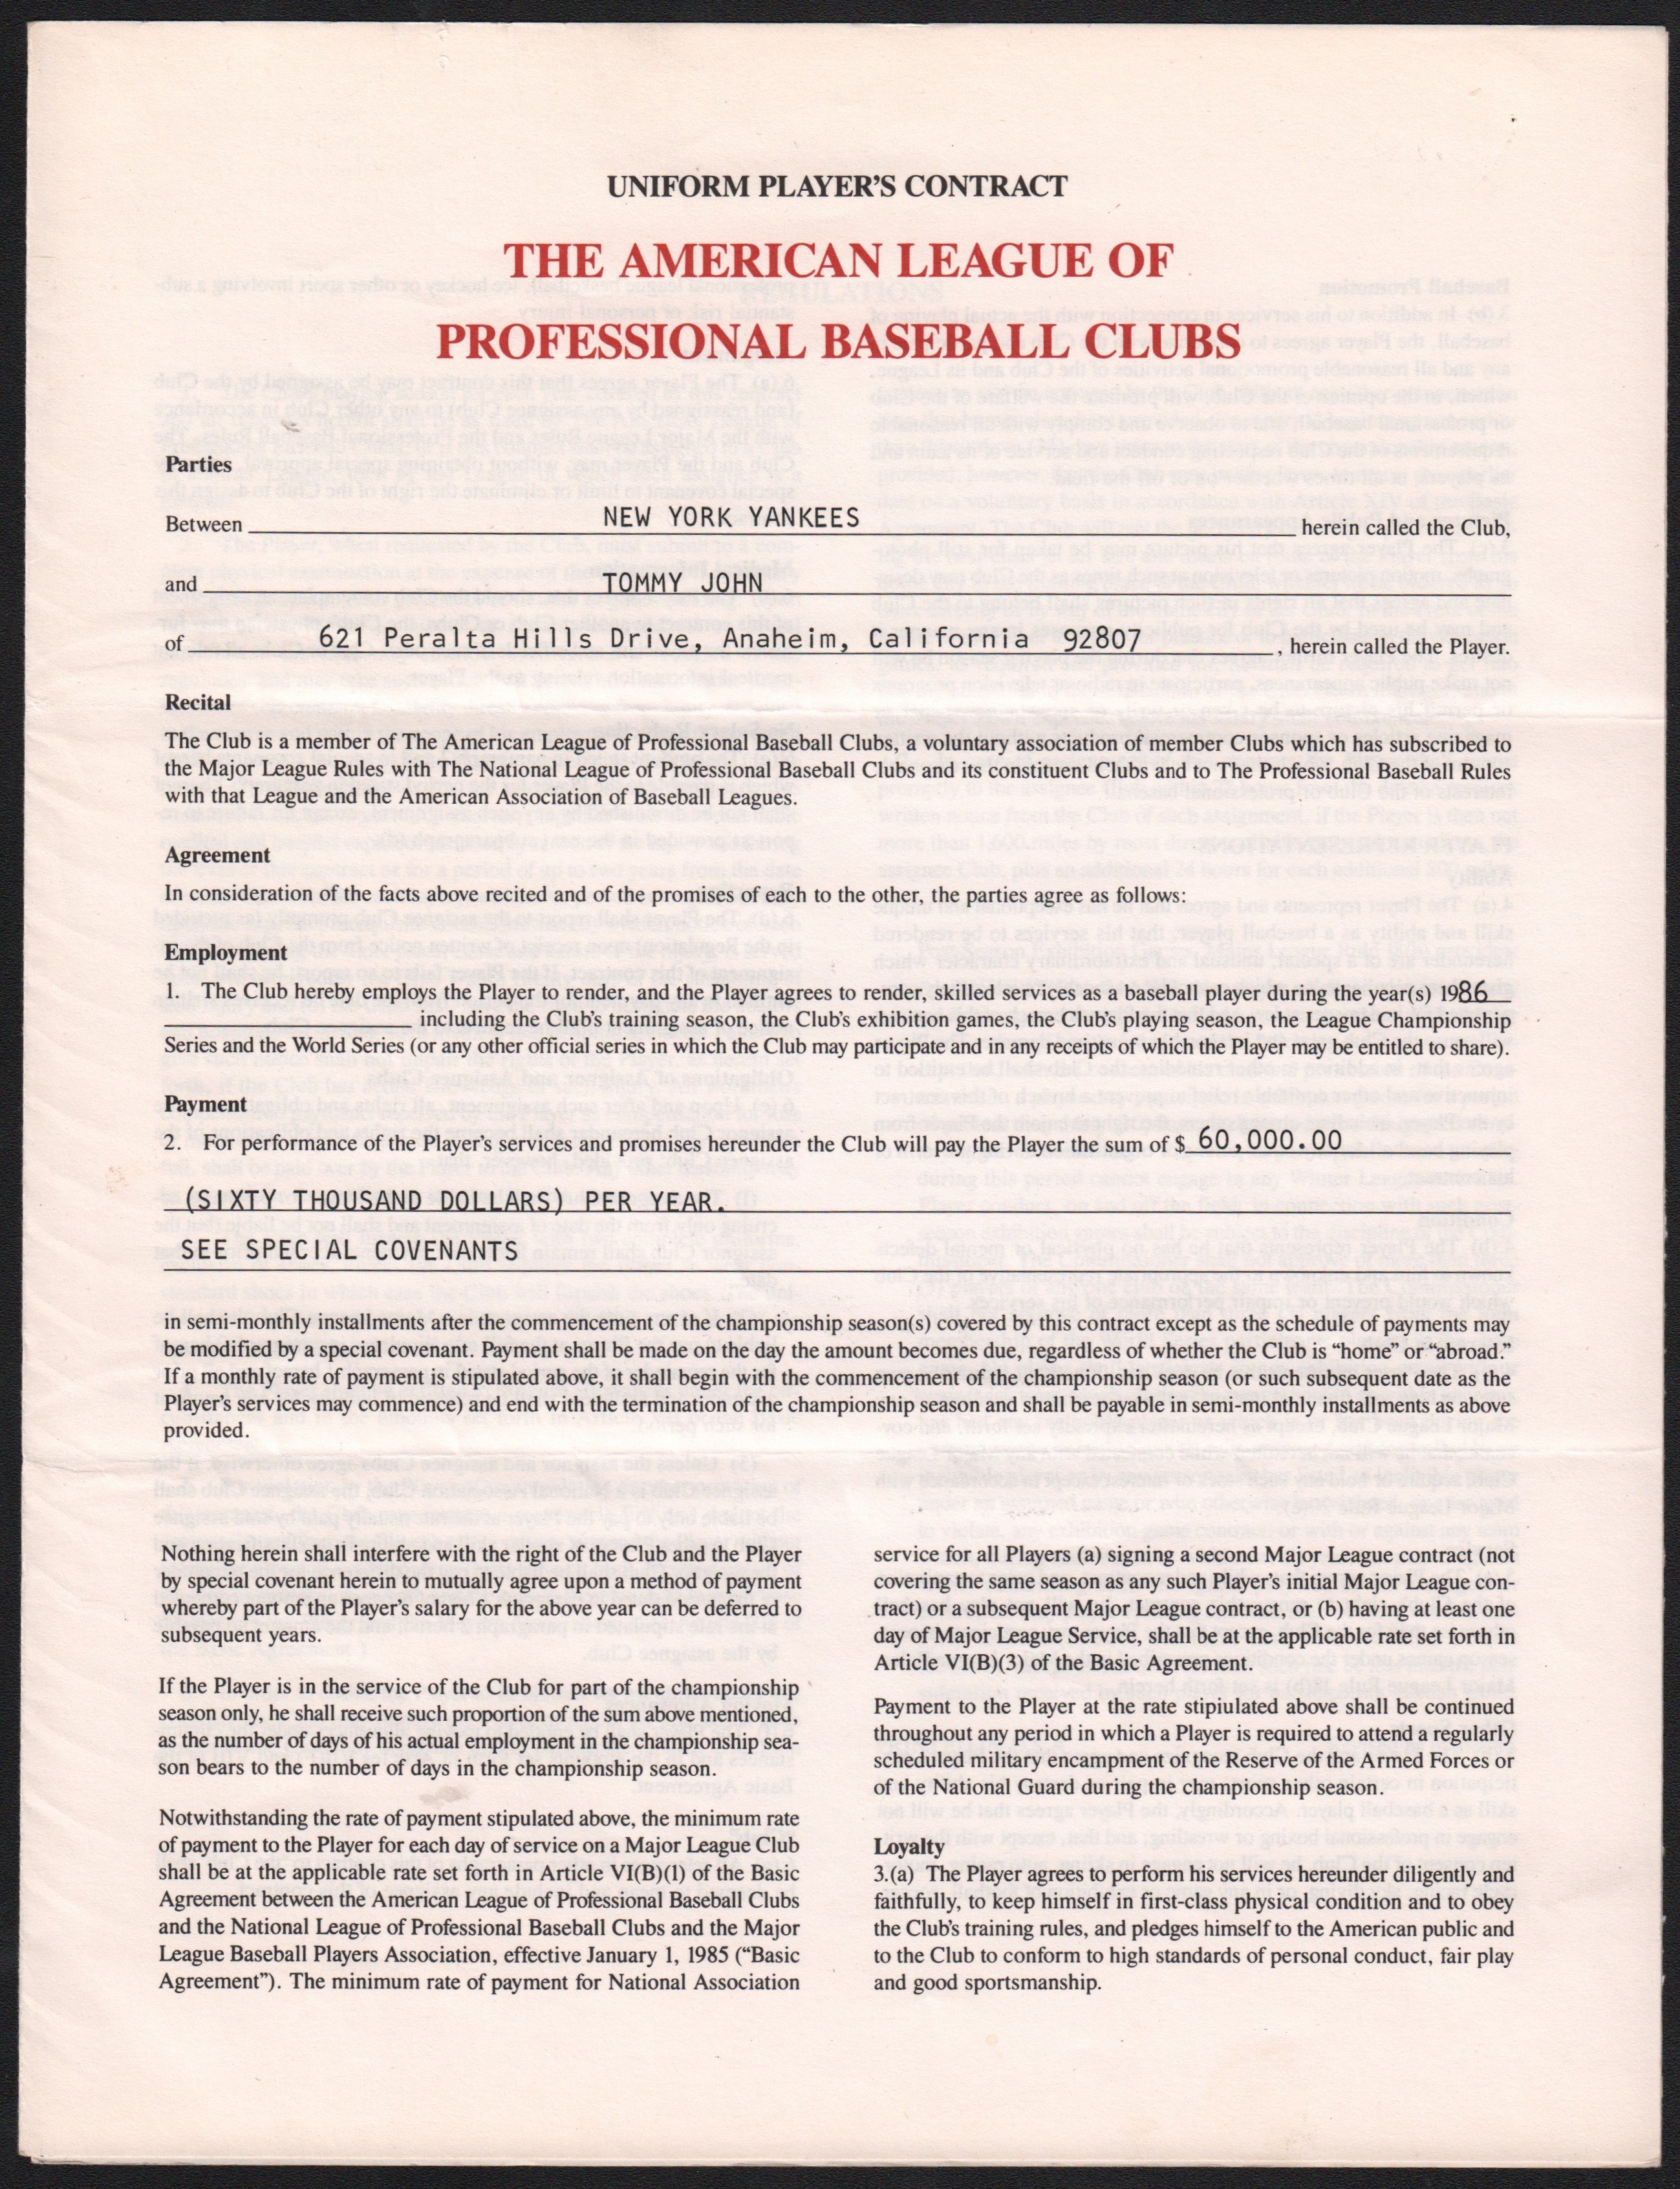 Baseball Autographs - 1986 Tommy John New York Yankees Contract with "Tommy John" Surgery Sign-off